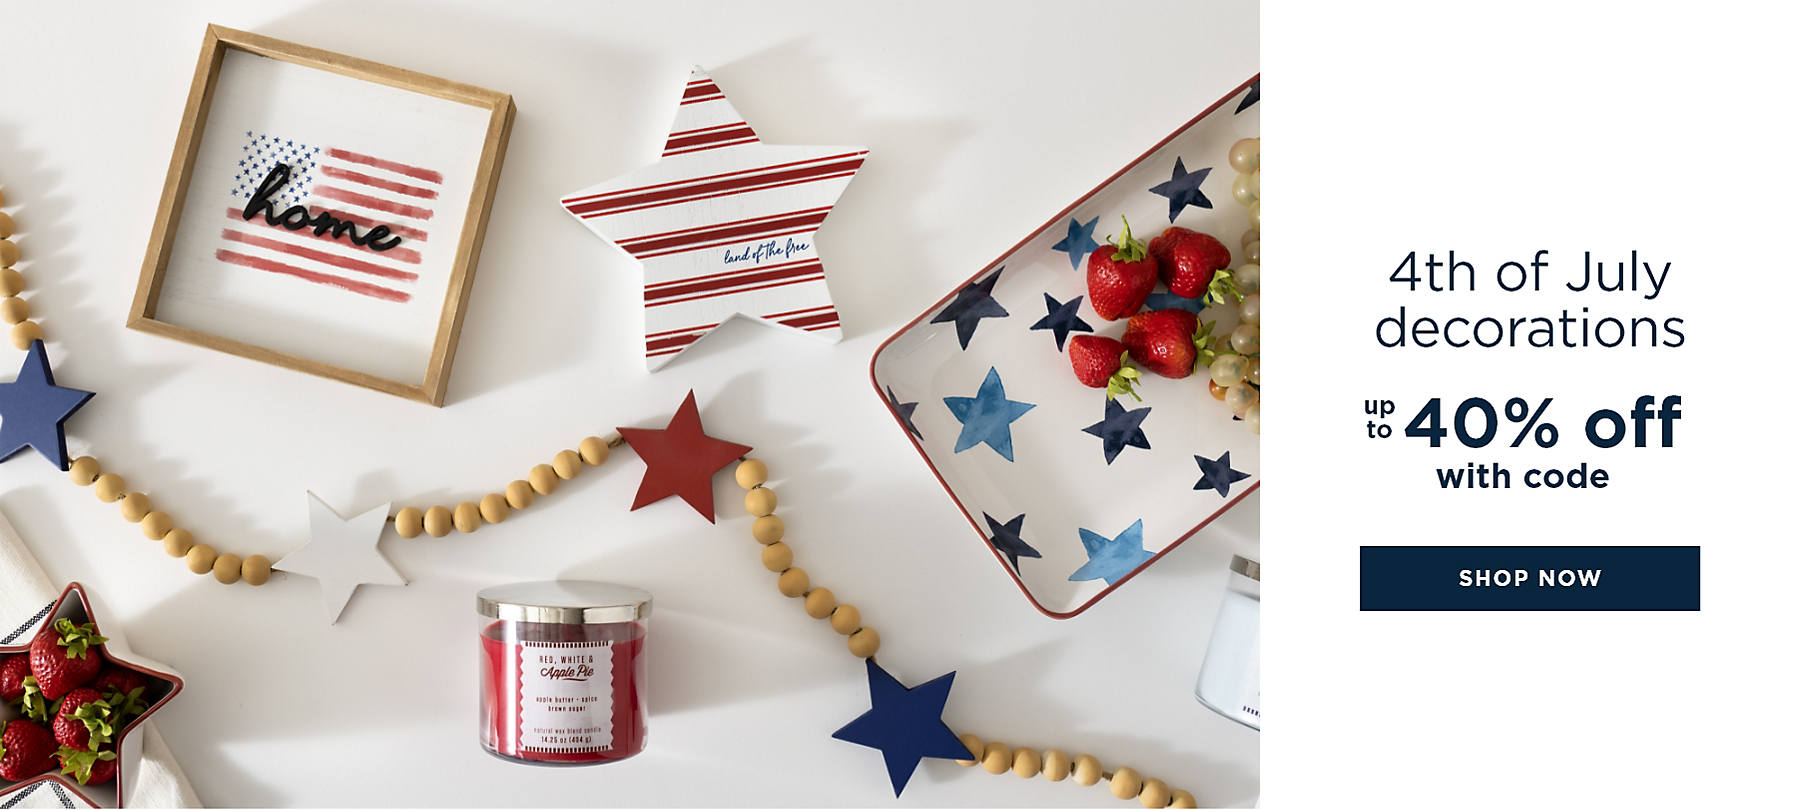 4th of July decorations up to 40% off with code shop now